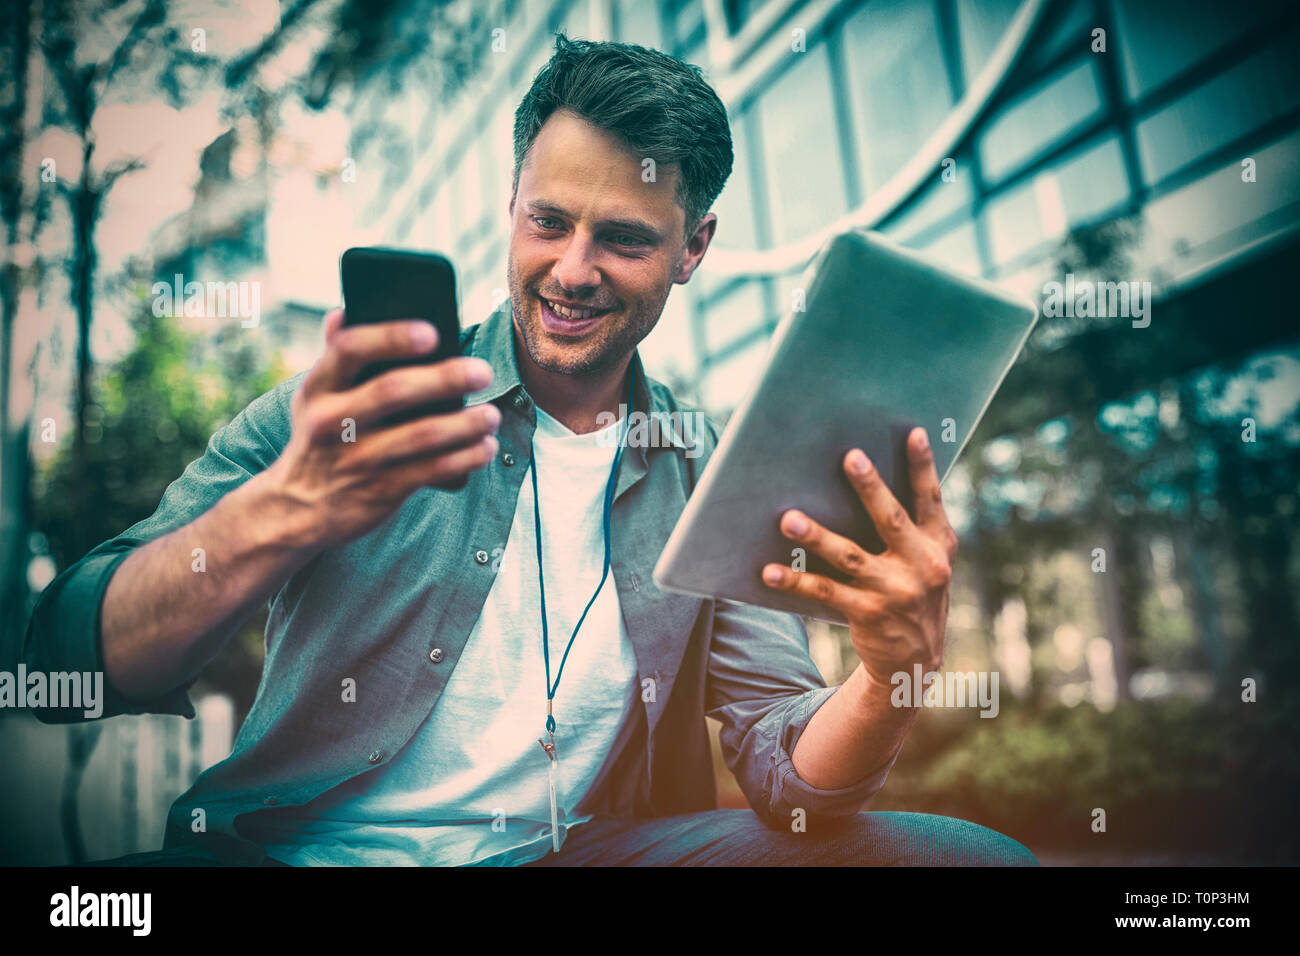 Business executive using mobile phone and digital tablet against office building Stock Photo